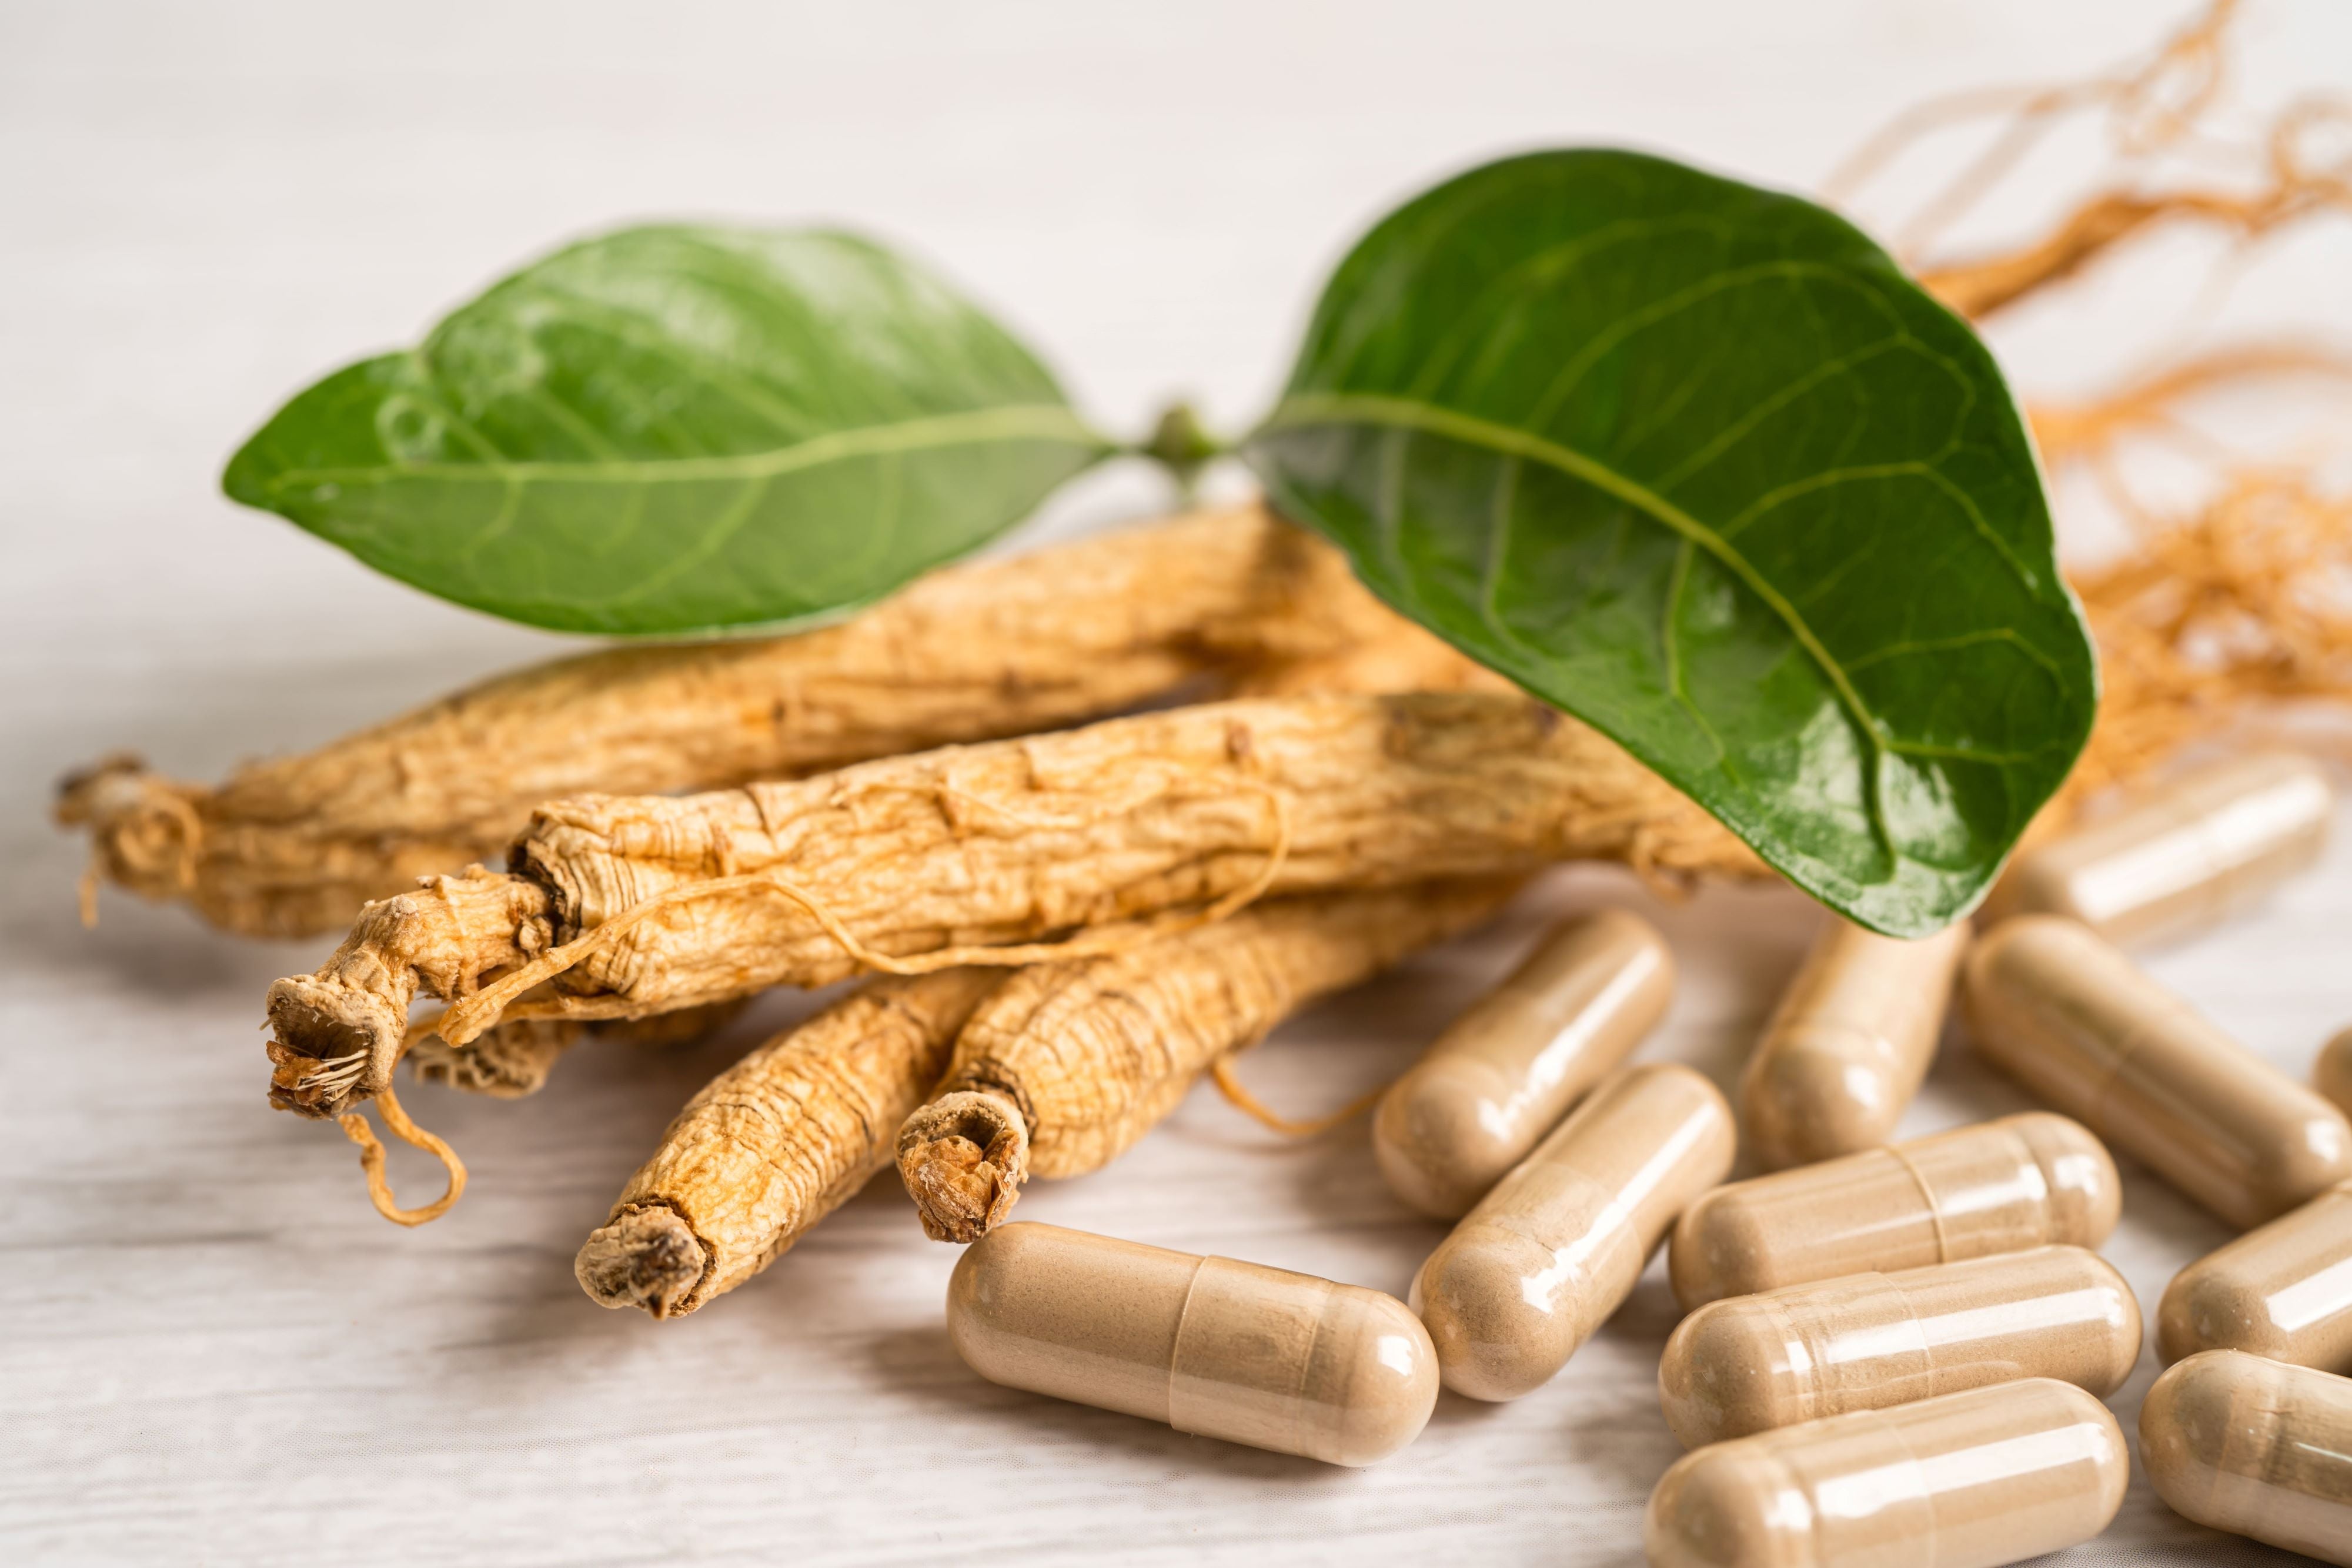 How to Use Ashwagandha Effectively